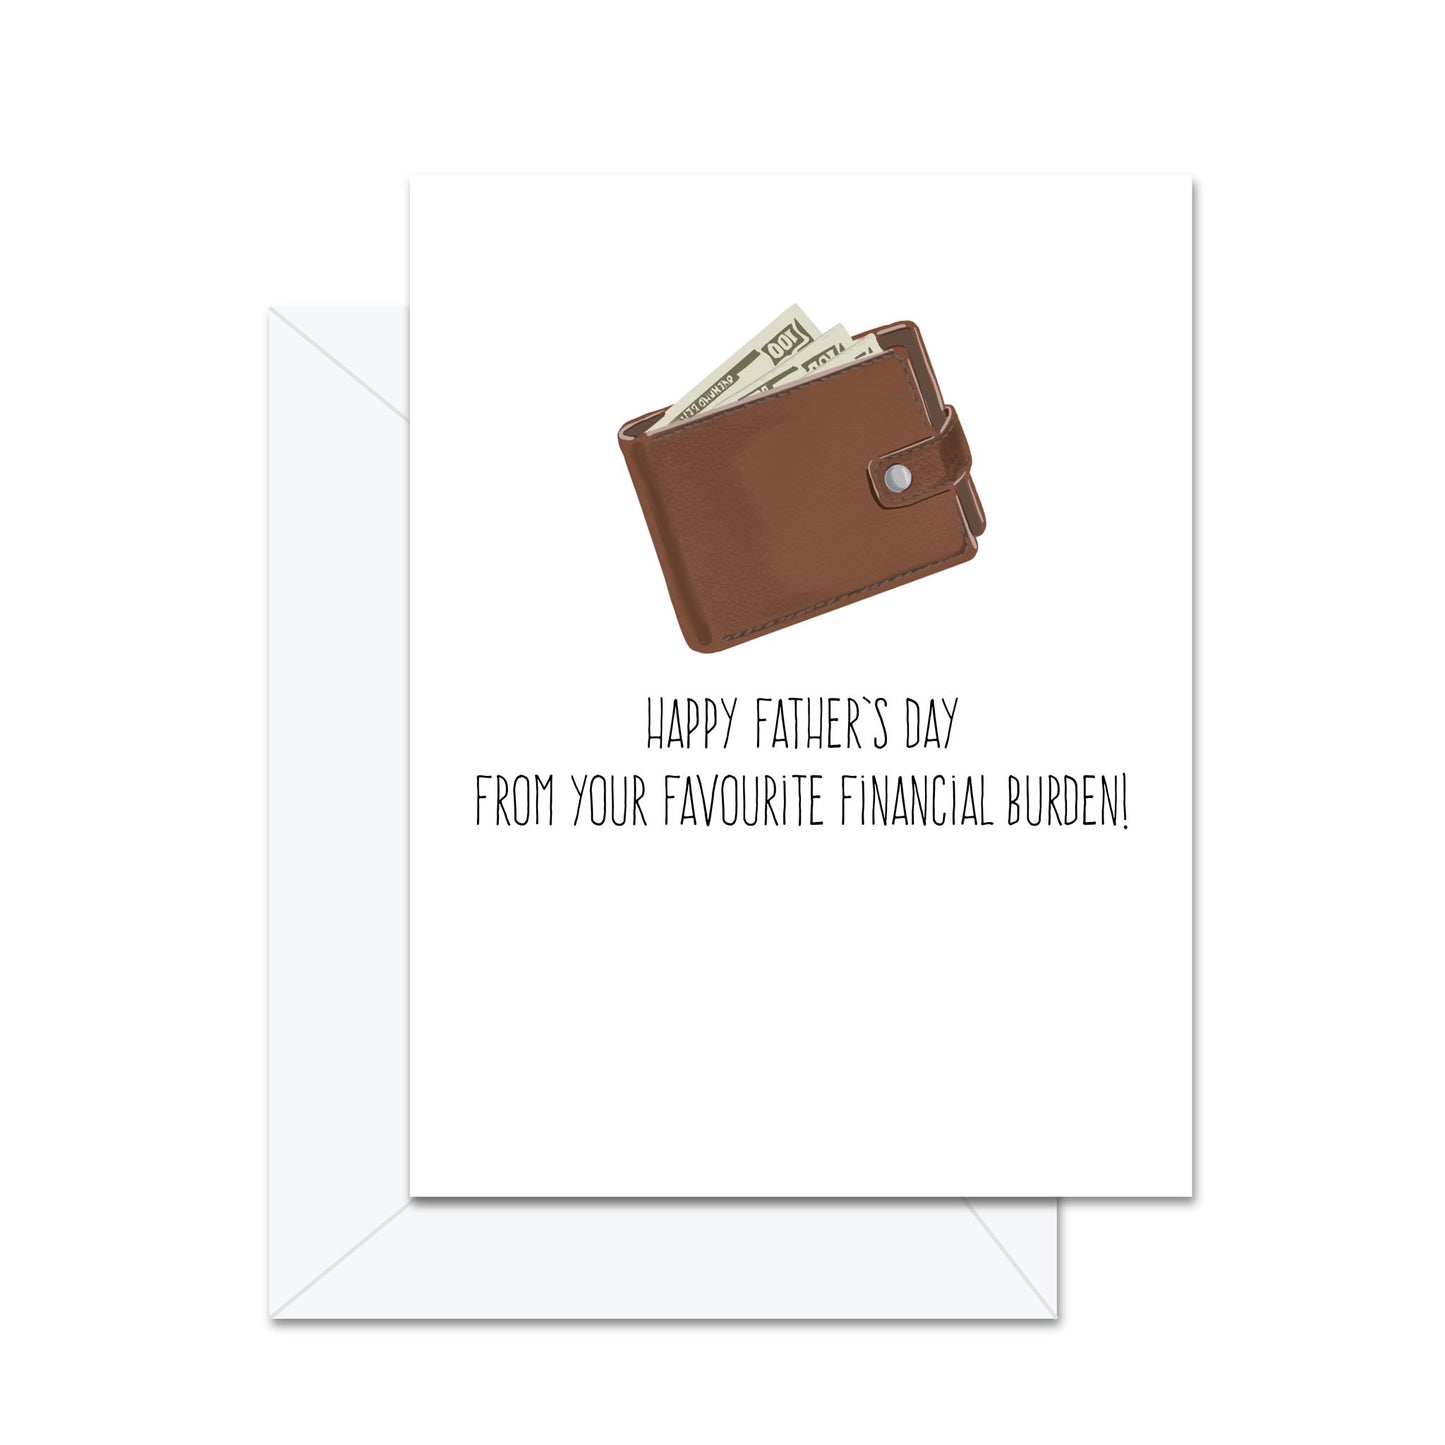 Happy Father's Day From Your Favourite Financial Burden! - Greeting Card